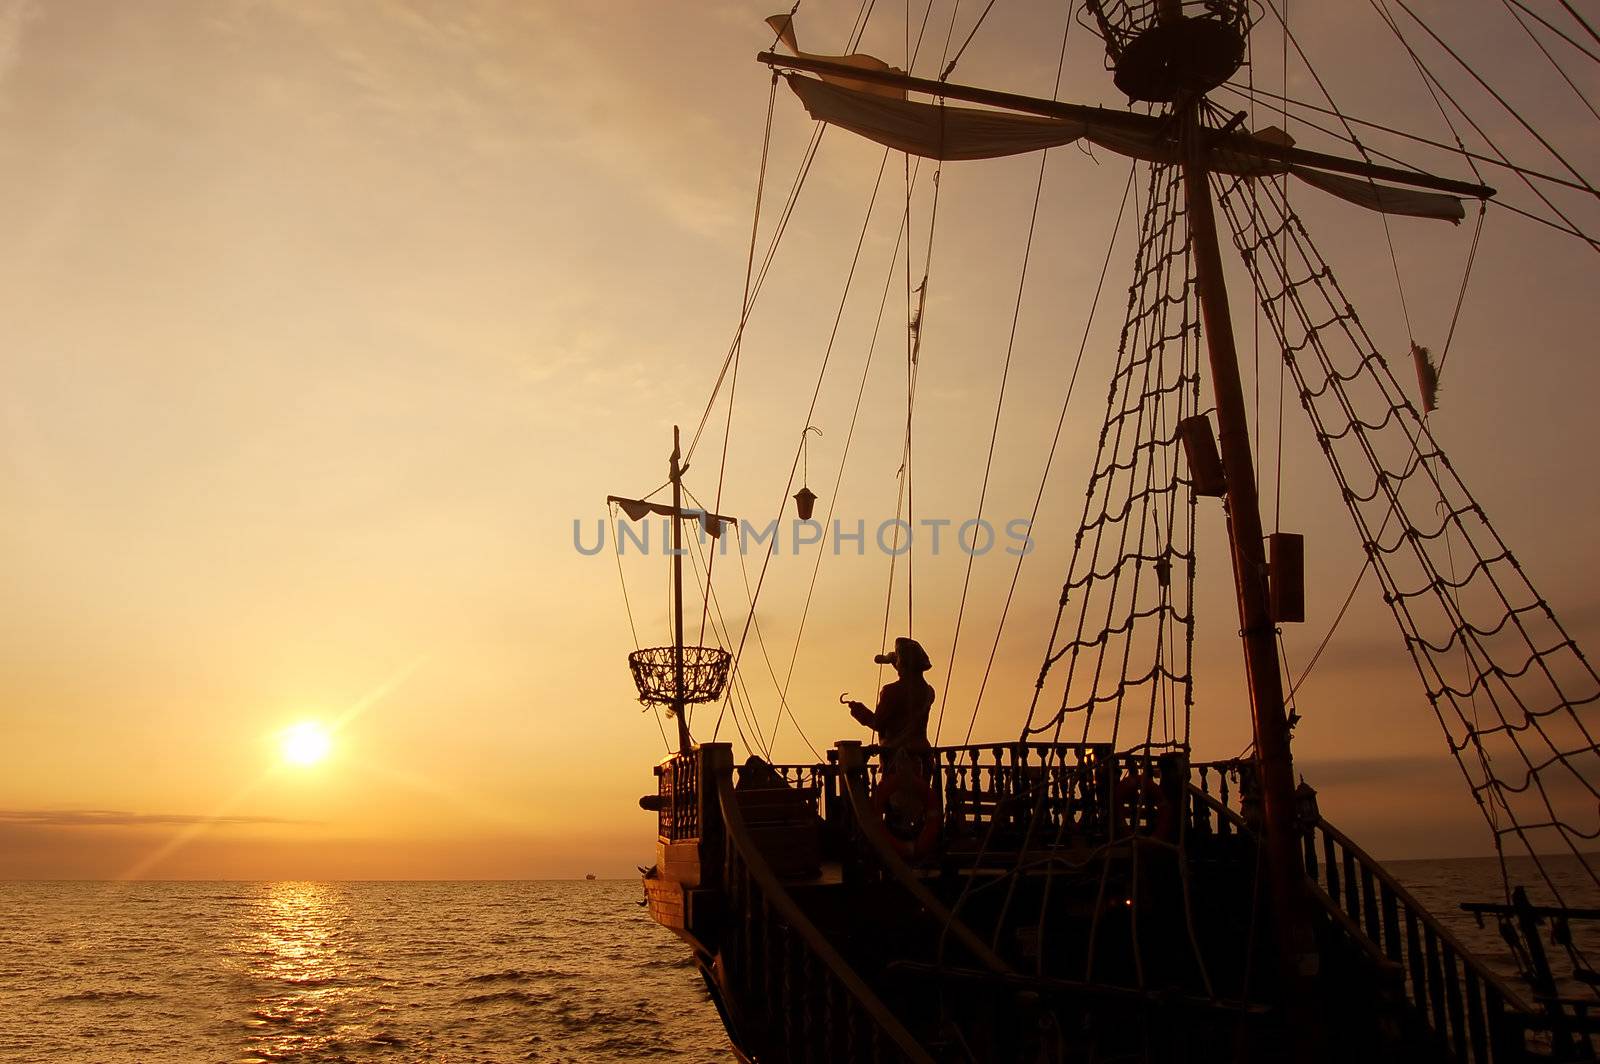 Pirate ship by photocreo